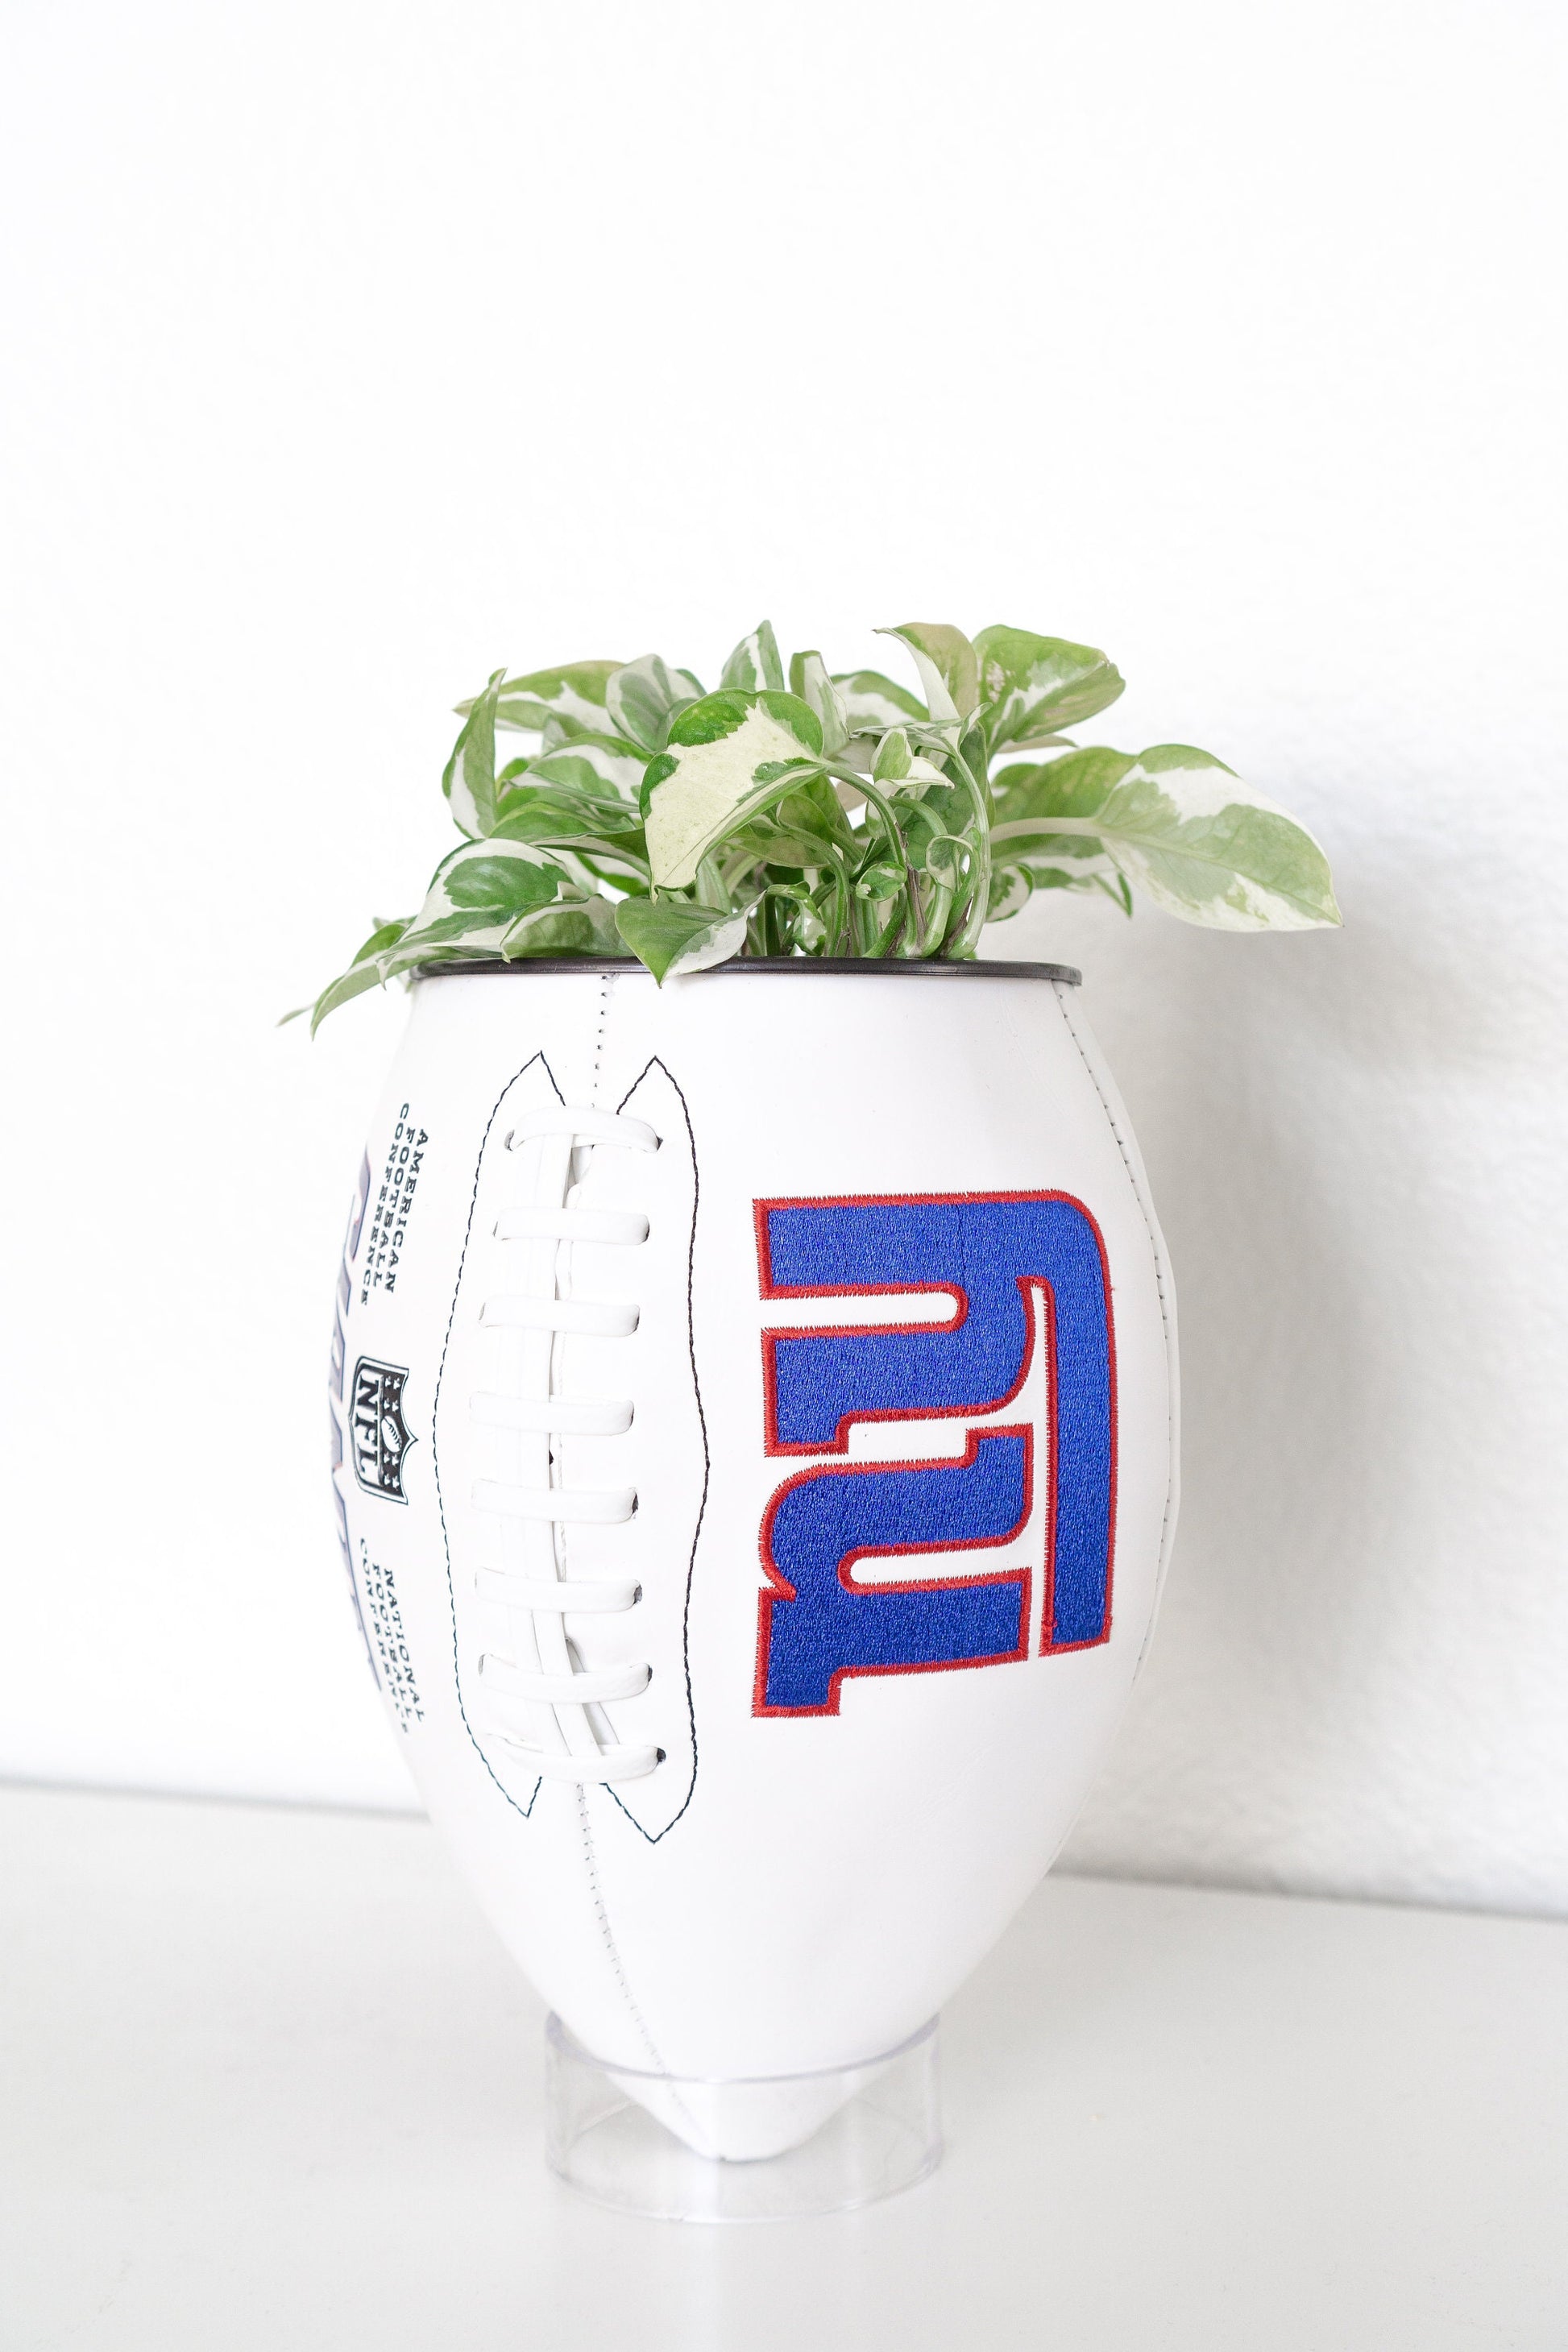 plntrs - NFL New York Giants Team Wilson Football planter Playoffs superbowl - with stand